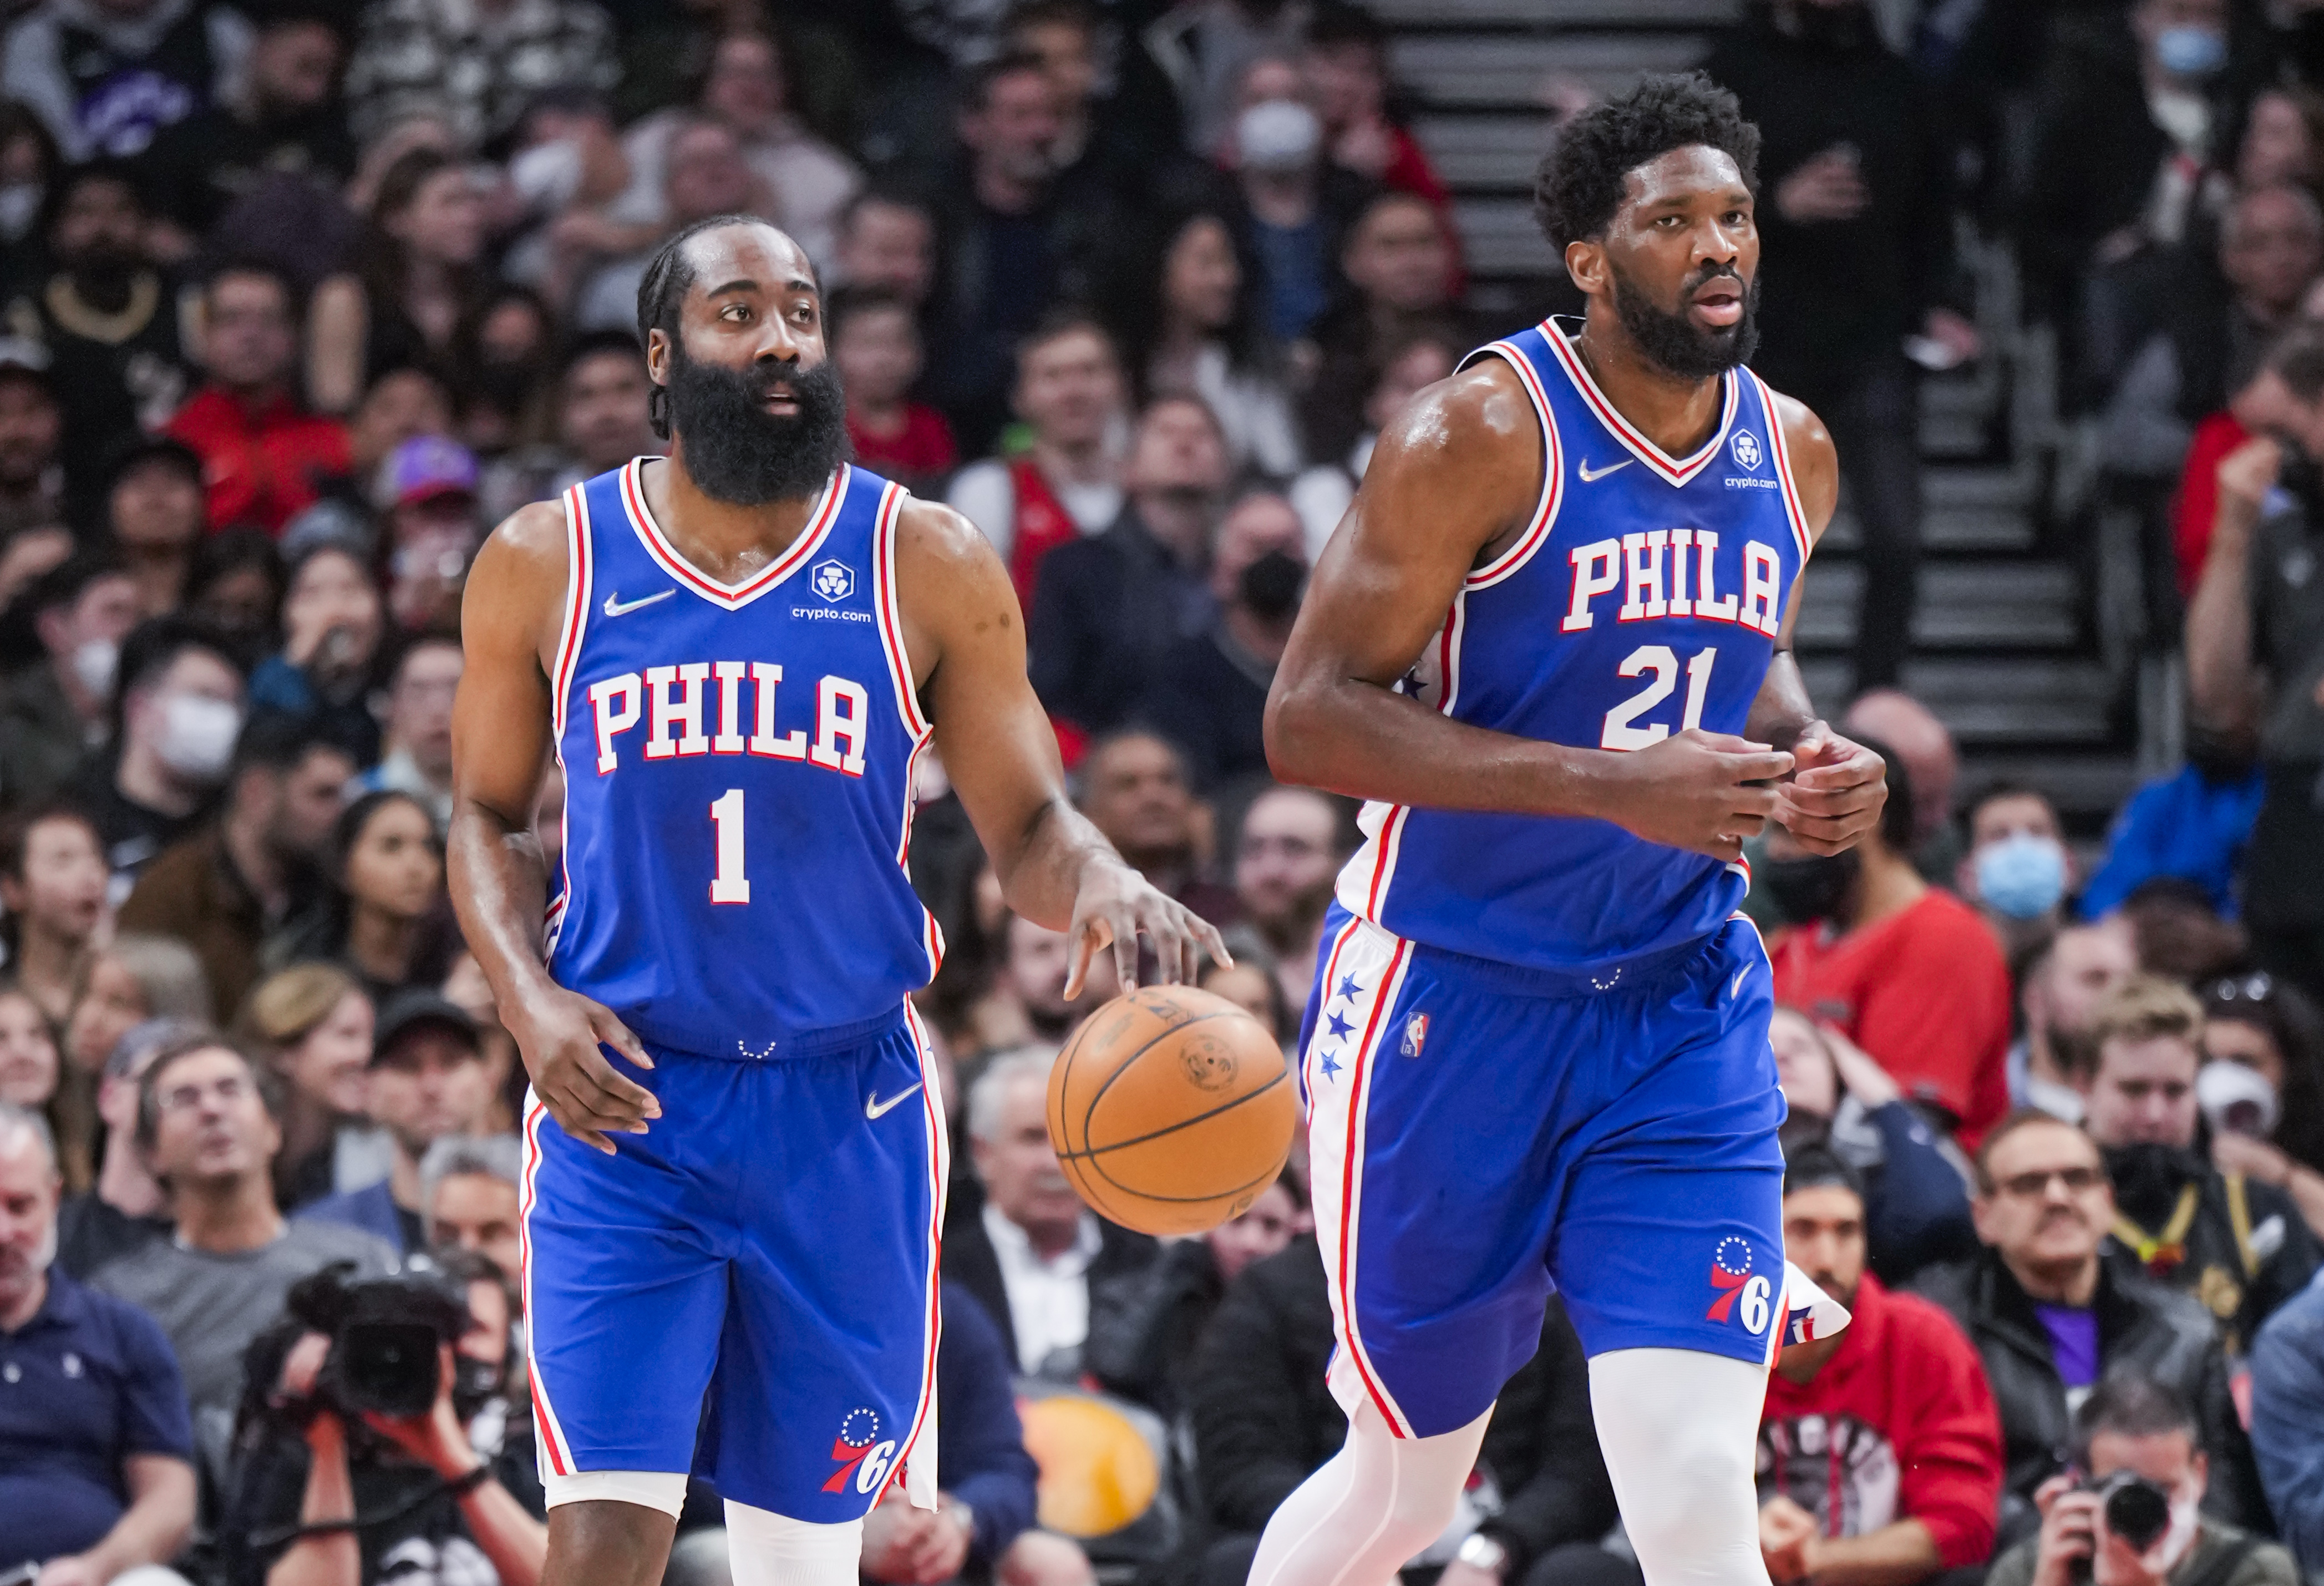 NBA streams (10/18/22) FREE live streams, times, TV channels, schedule for 76ers vs